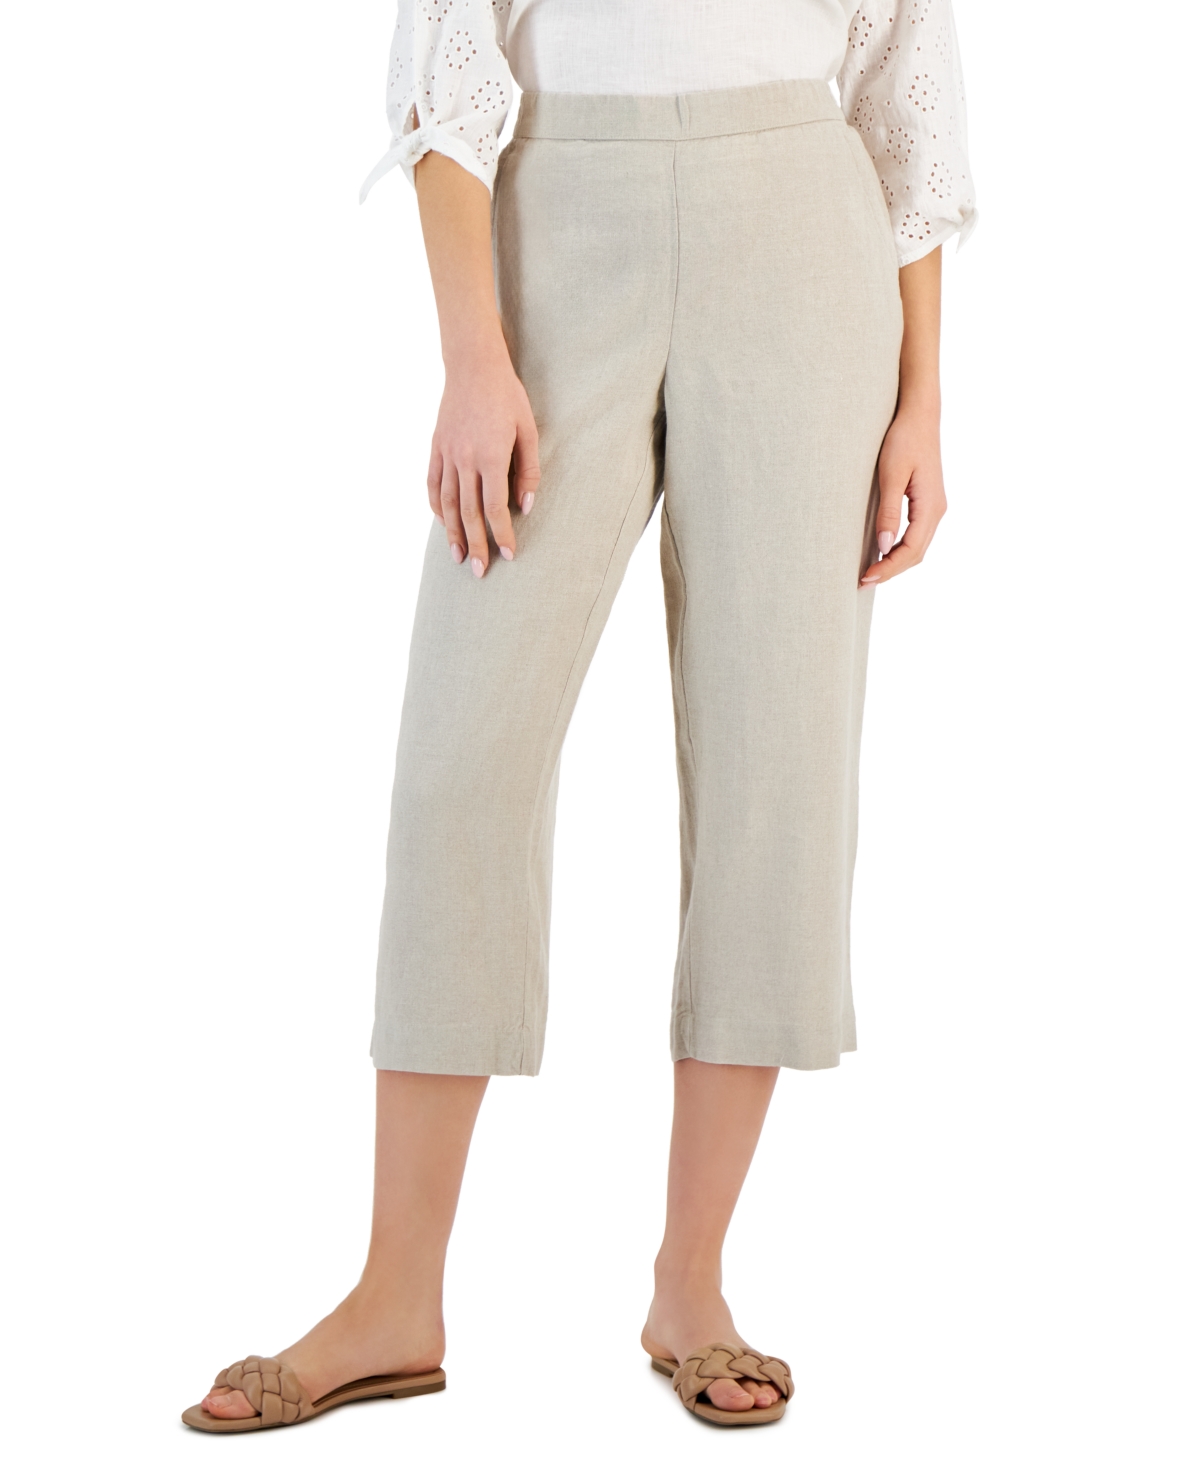 Women's 100% Linen Solid Cropped Pull-On Pants, Created for Macy's - Cool Olive